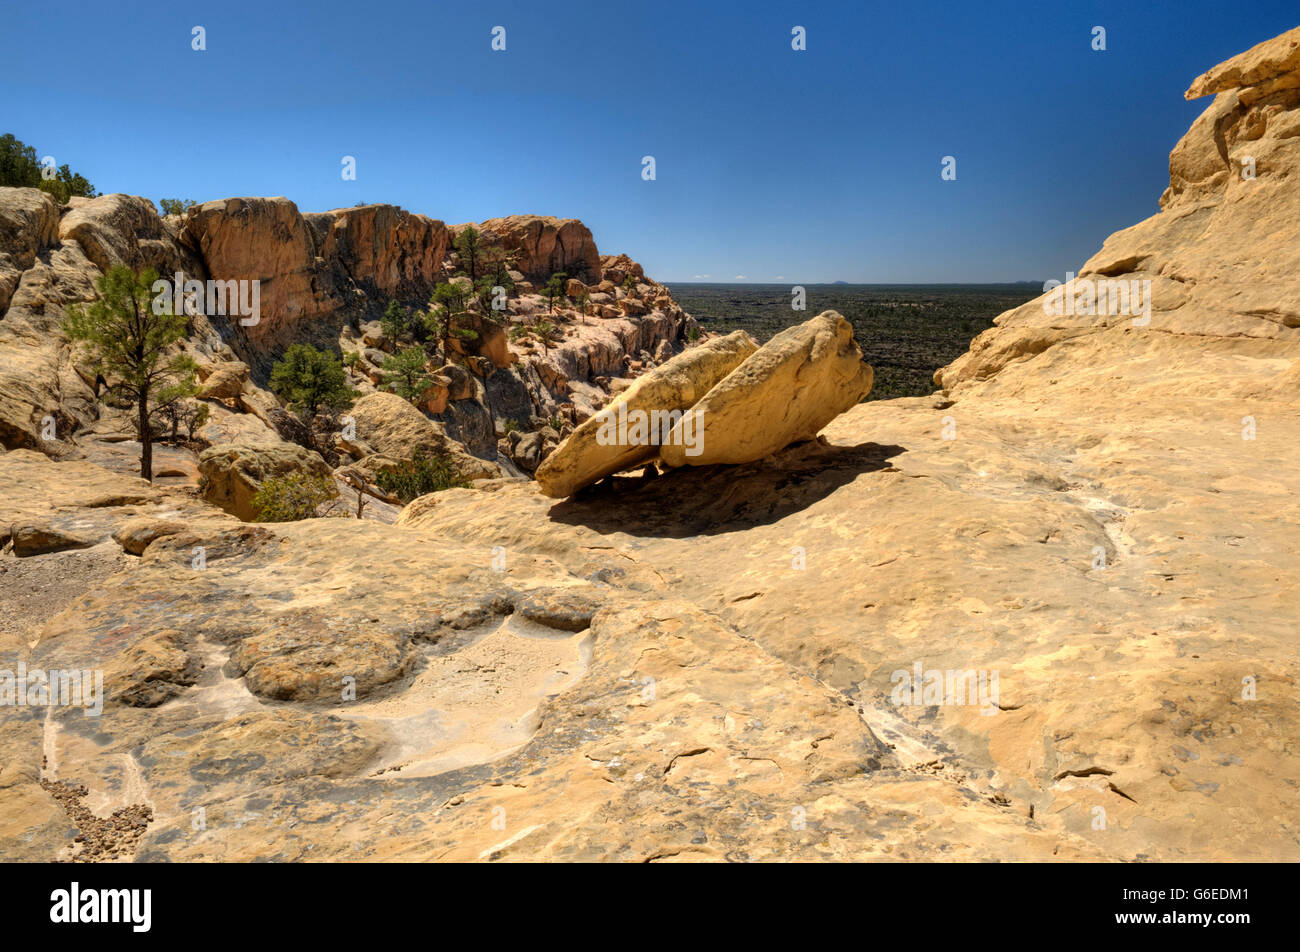 One of the views from the Sandstone Bluffs area of the El Malpais National Monument near Grants, New Mexico. Stock Photo